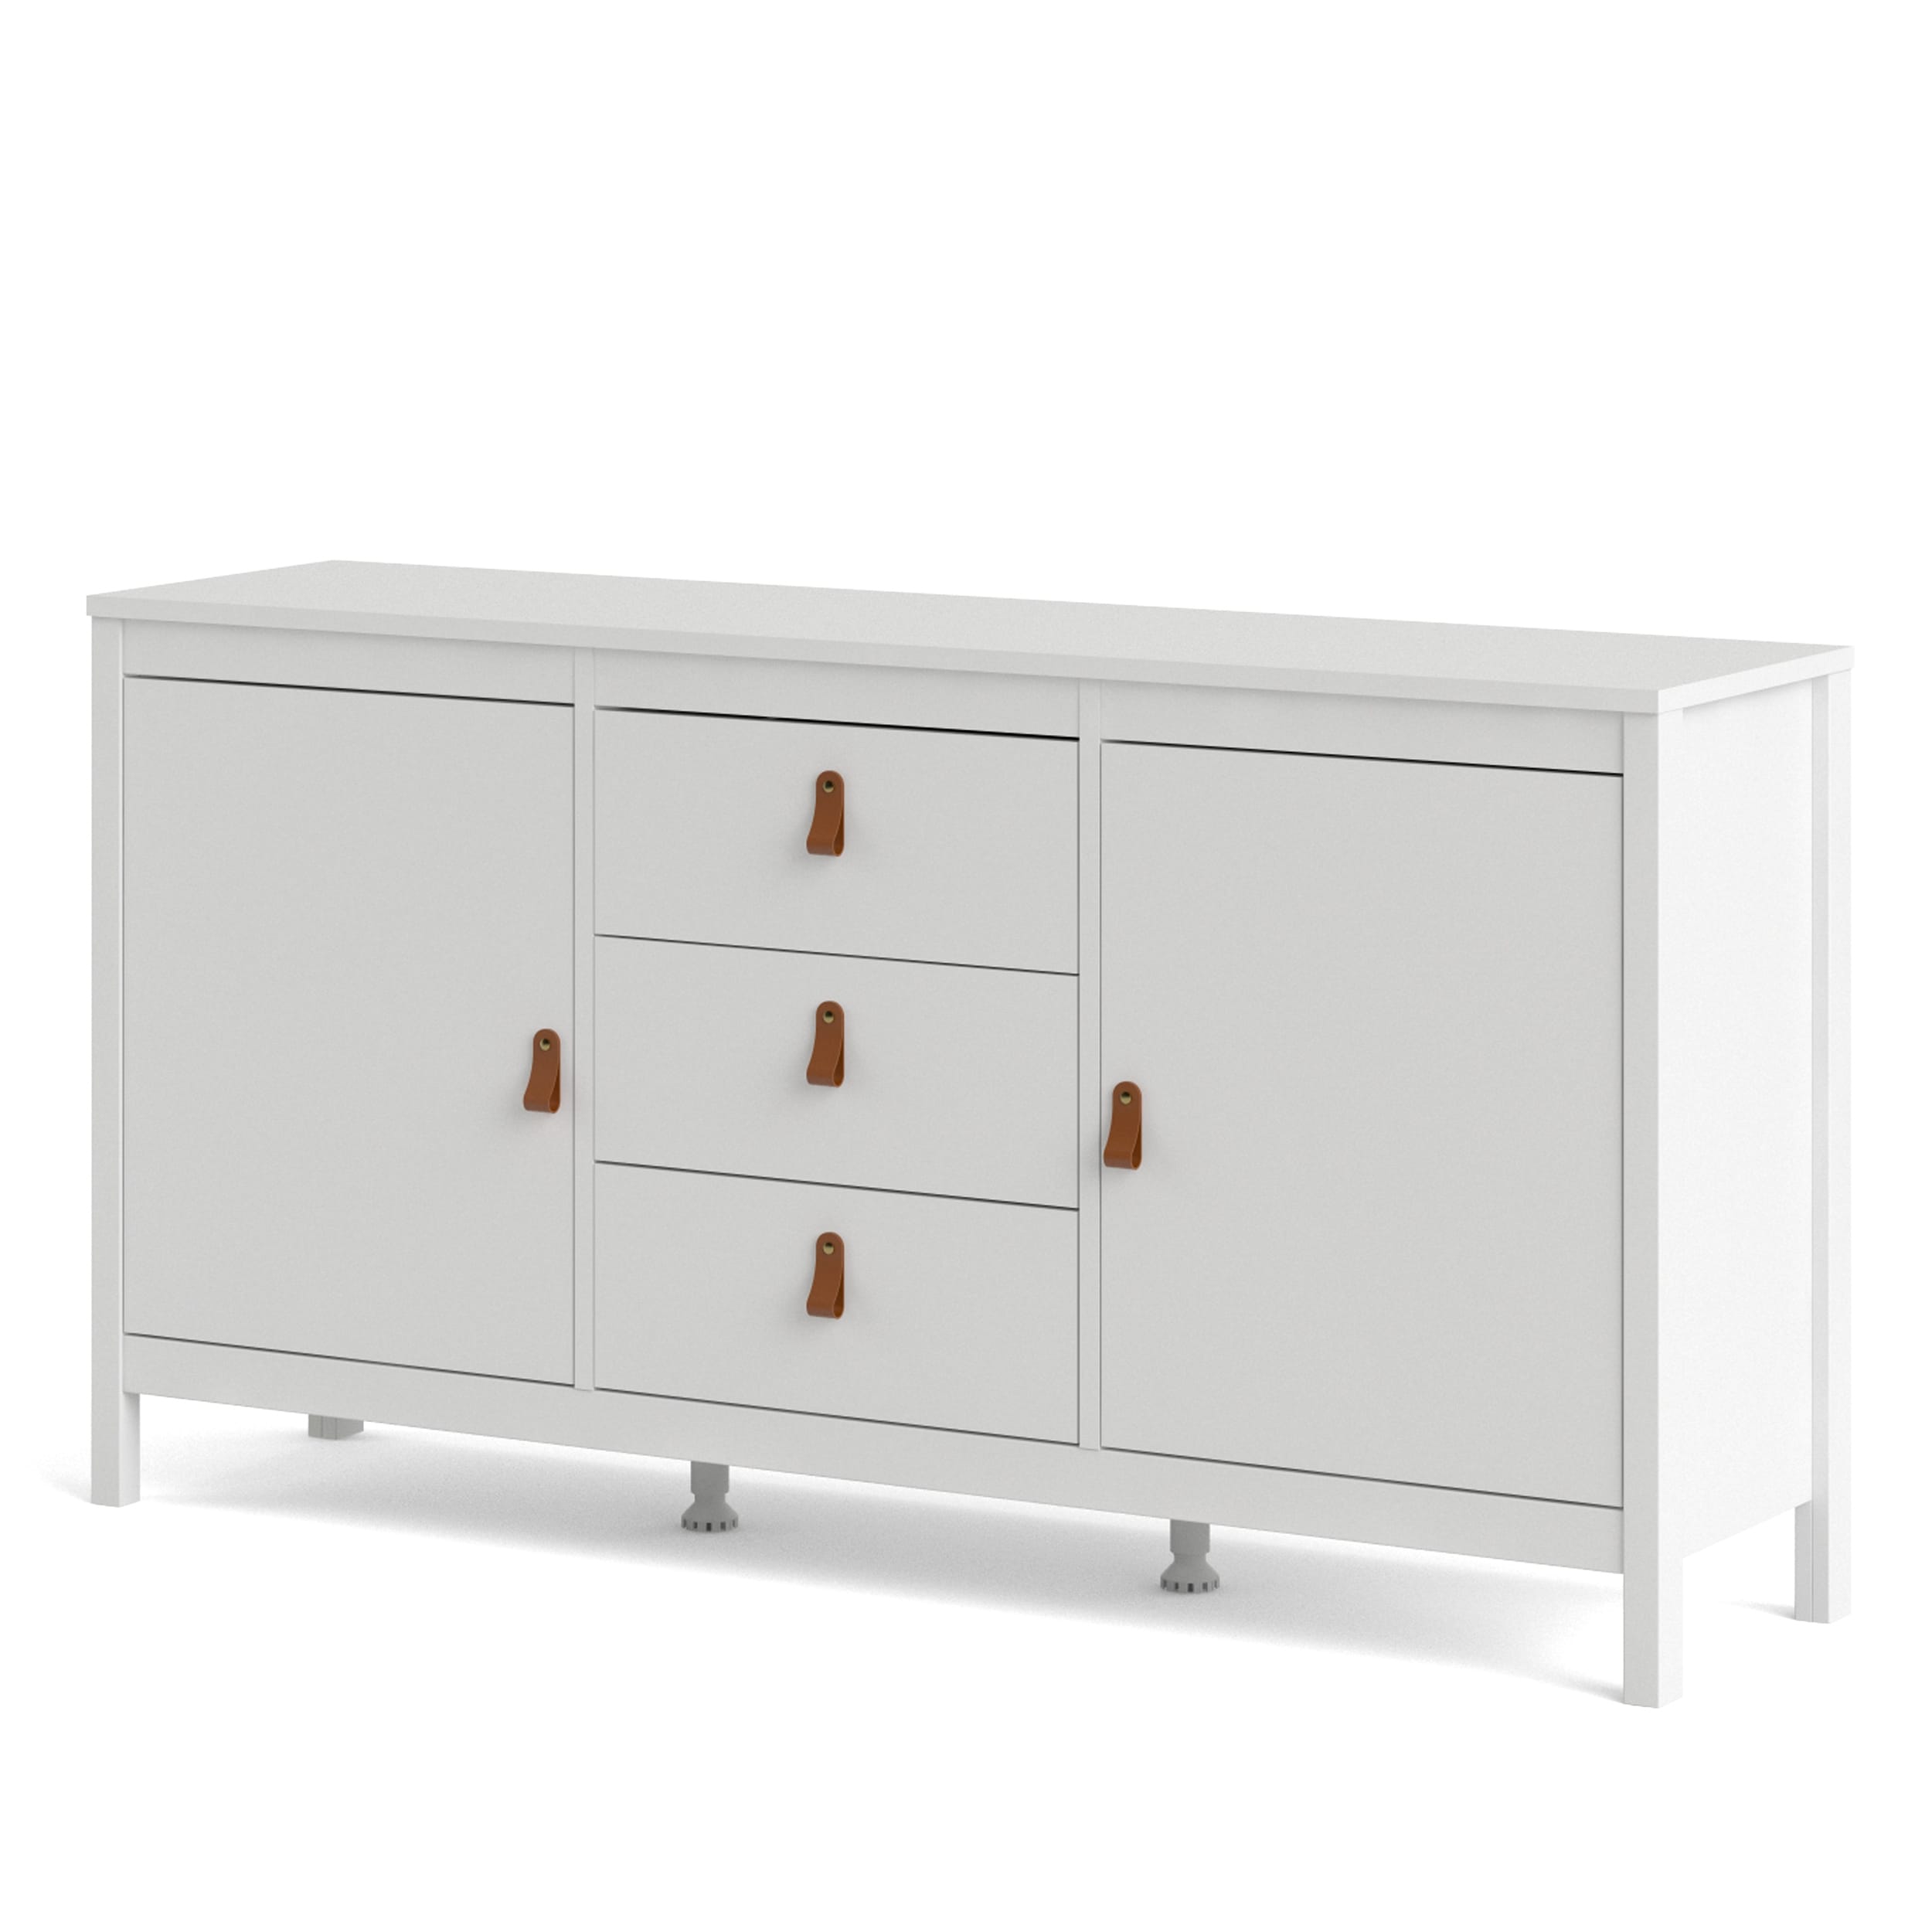 Porch & Den Madrid 2-Door - Bed Sale 3-Drawers 33673465 Bath - Sideboard - Beyond On & with